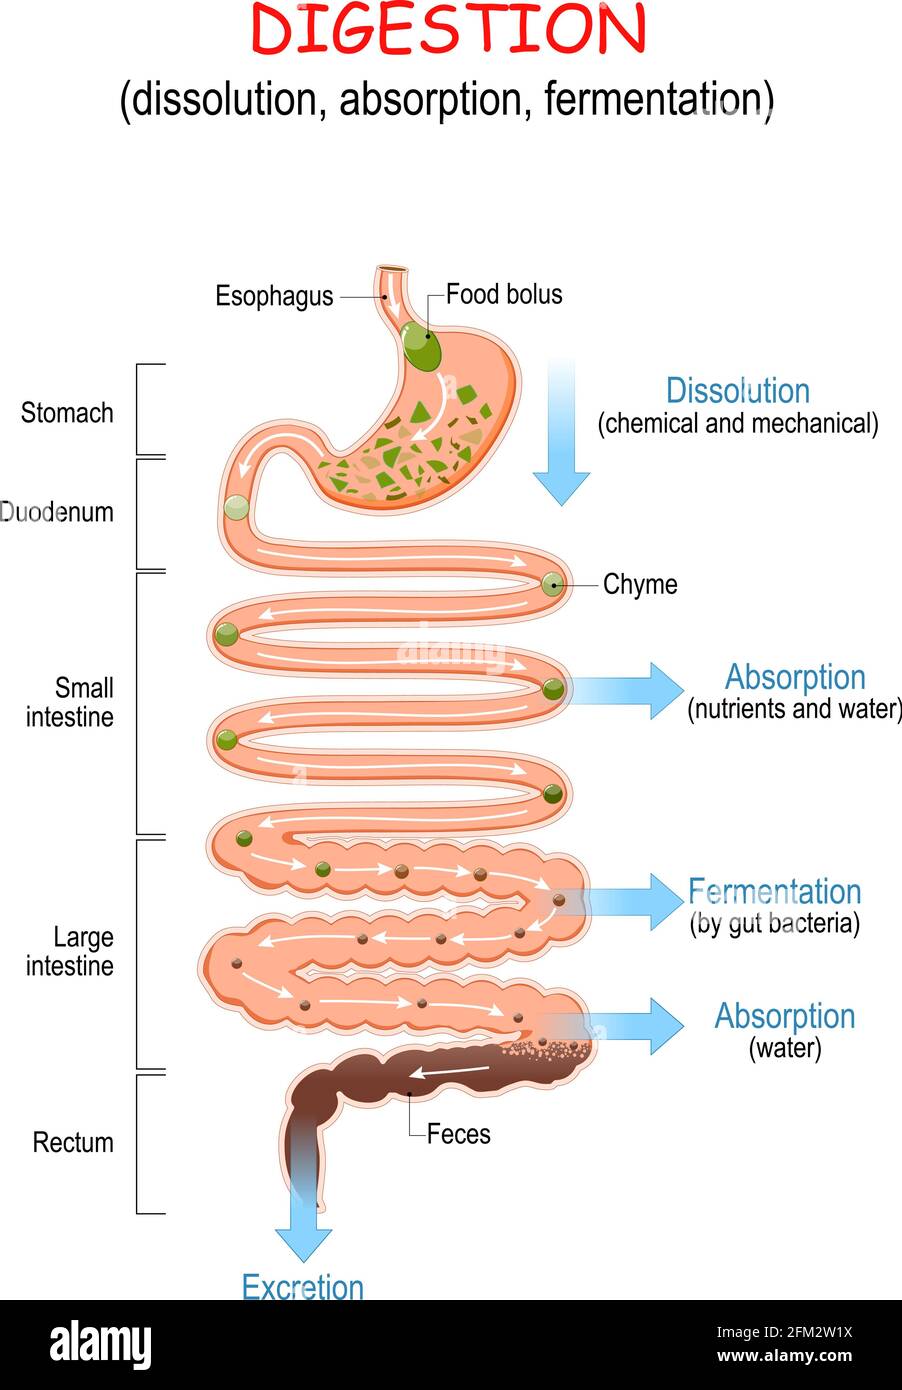 digestion (dissolution, absorption, fermentation). From food bolus or Chyme to Feces. Human digestive system: Esophagus, Stomach, Duodenum Stock Vector